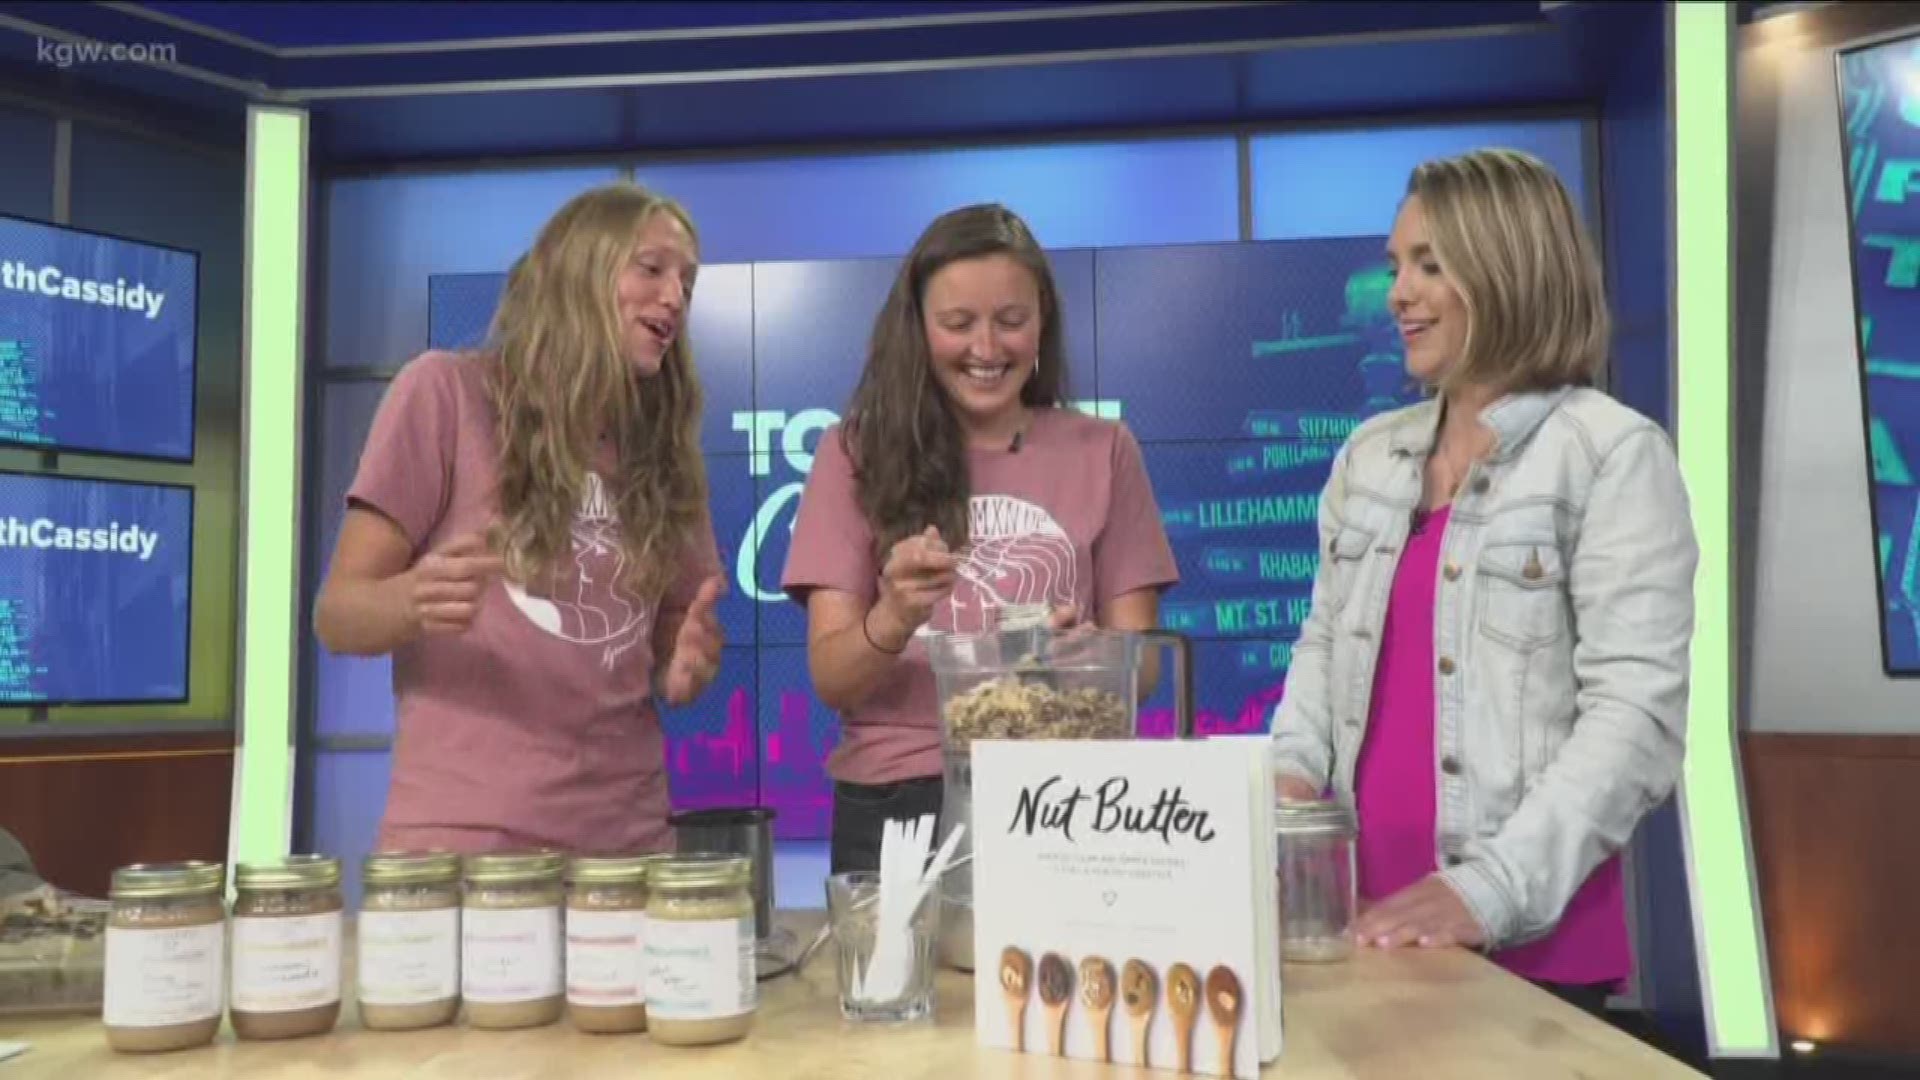 Ground Up Nut Butter now has a cookbook filled with more than 50 creative recipes.
#TonightwithCassidy